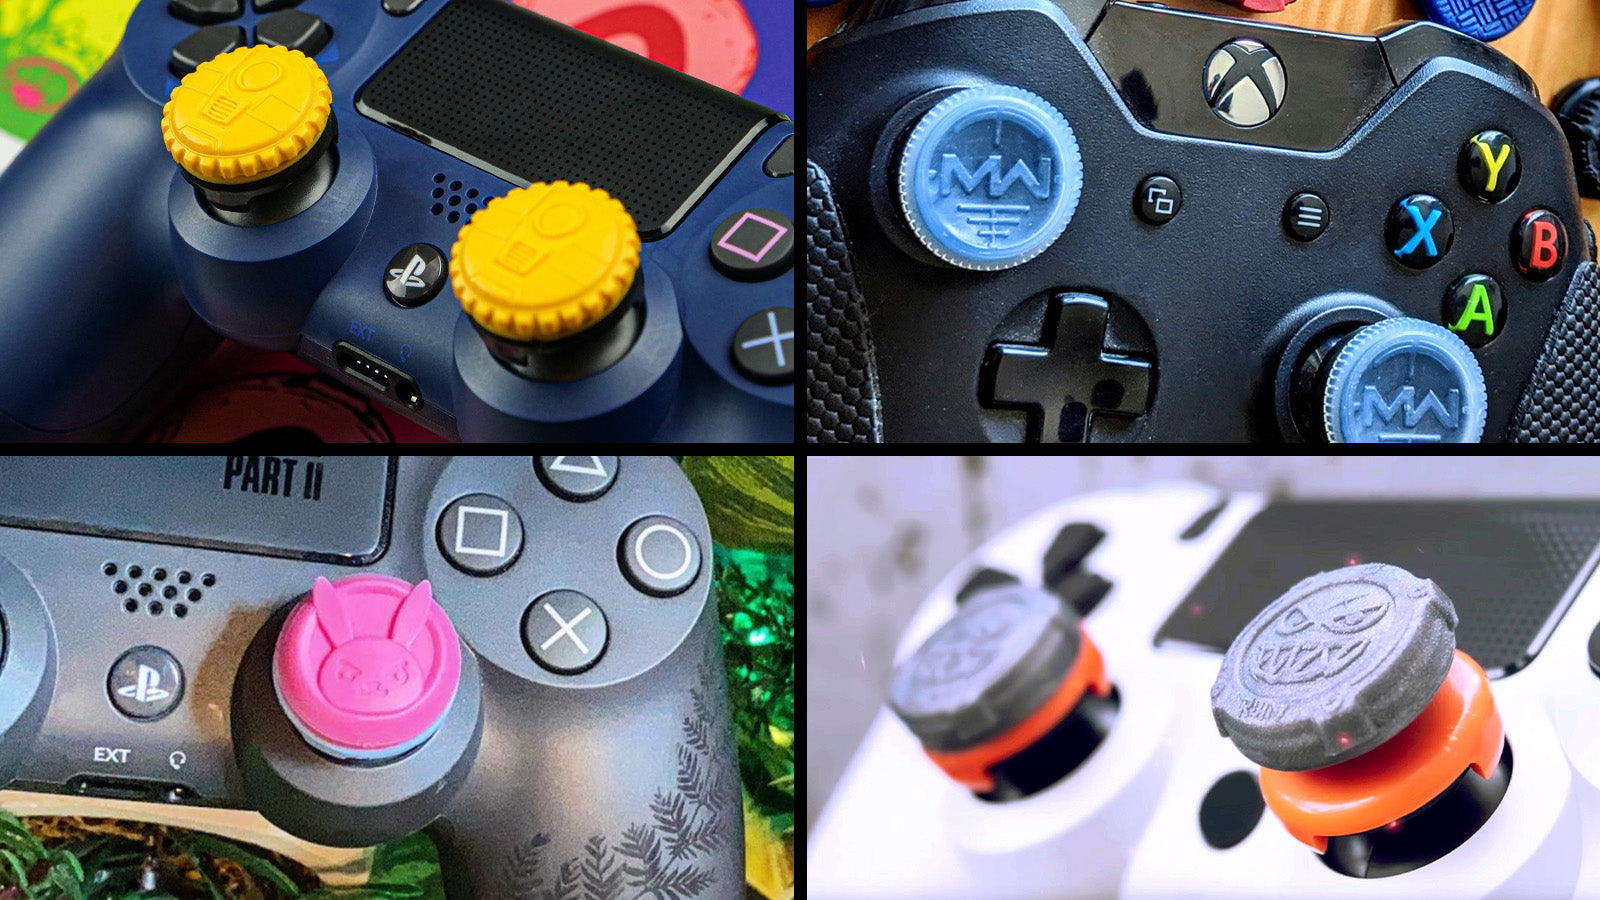 FreekNation's Collections - A Look Back At Classic KontrolFreek Design